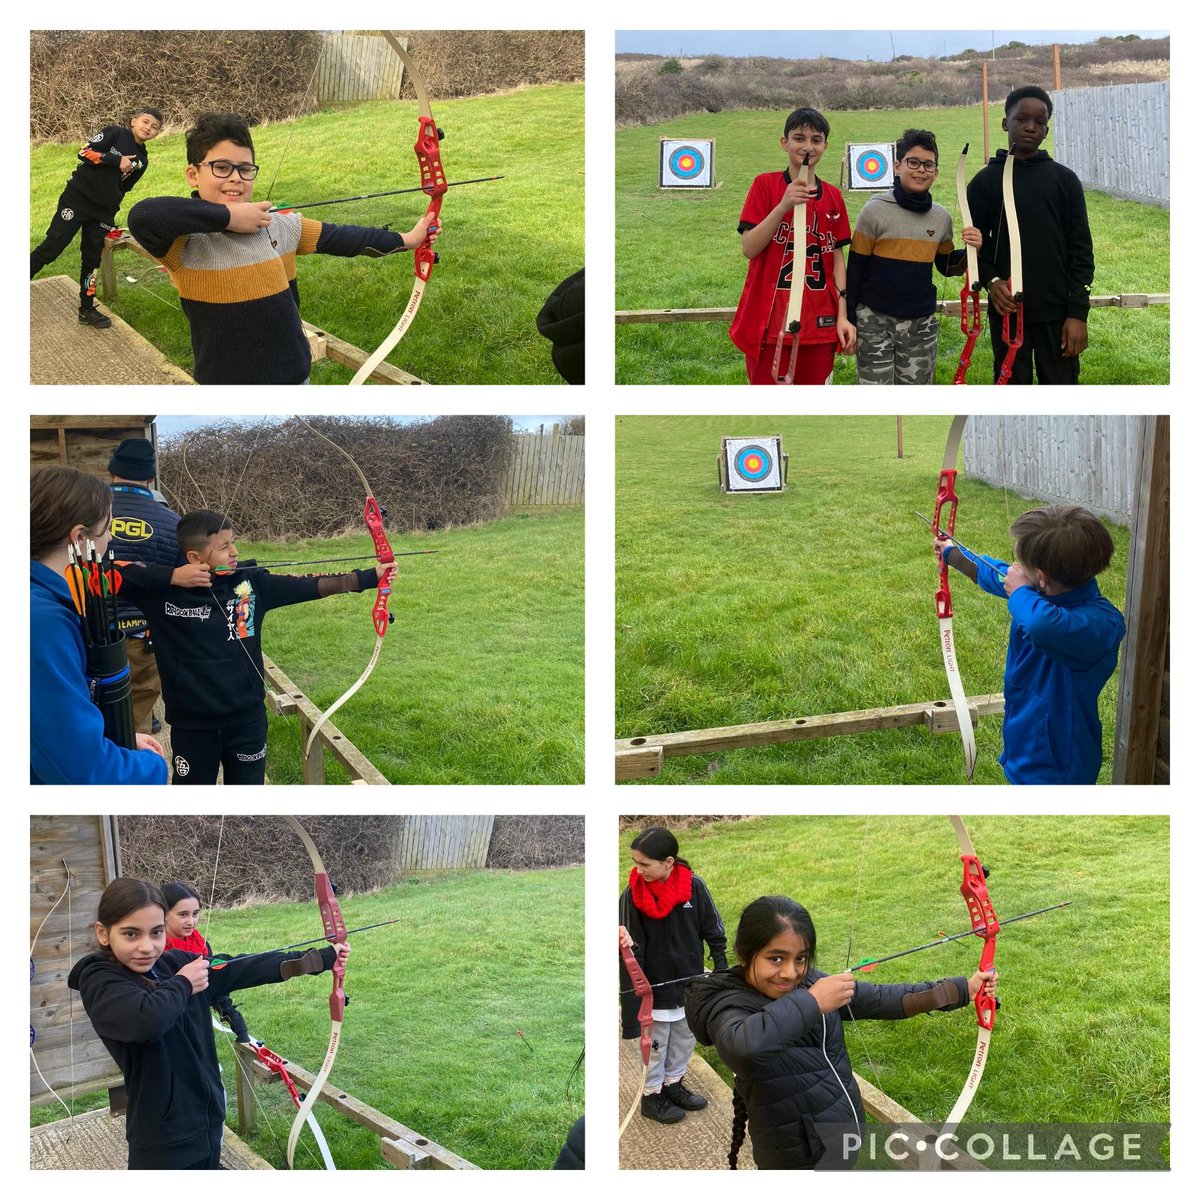 Another amazing group having a fantastic time on the beach and in archery @PGLTravel those wonderful smiling faces says it all. @woodberrydownN4 #year6